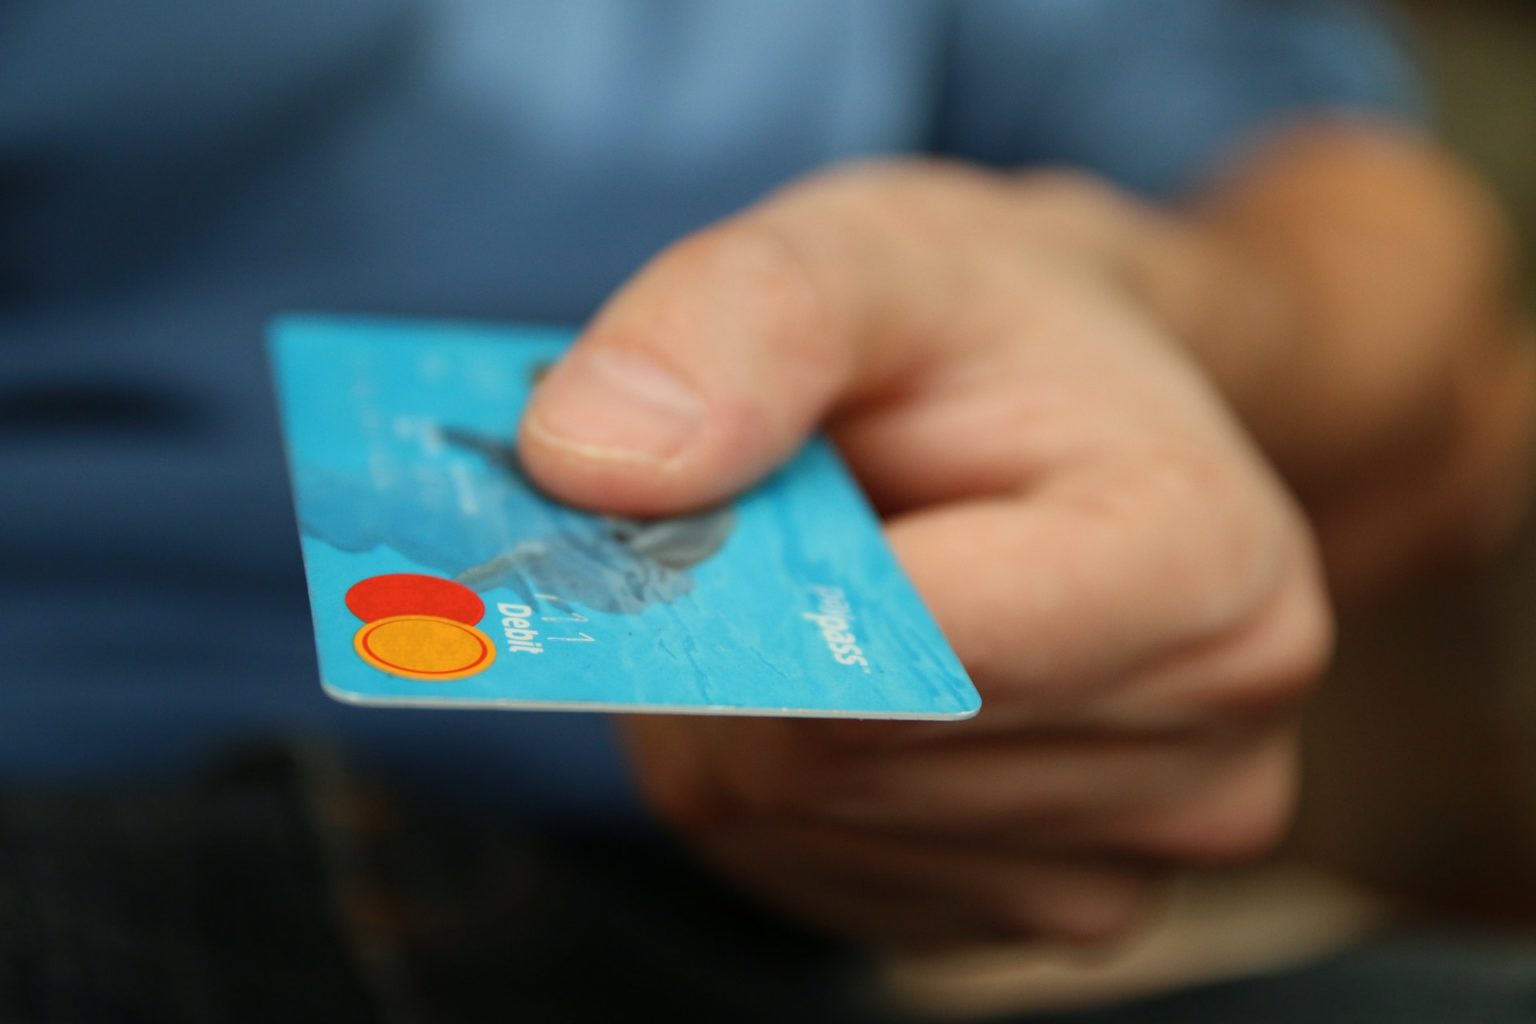 How to Get a New Credit-Card Account